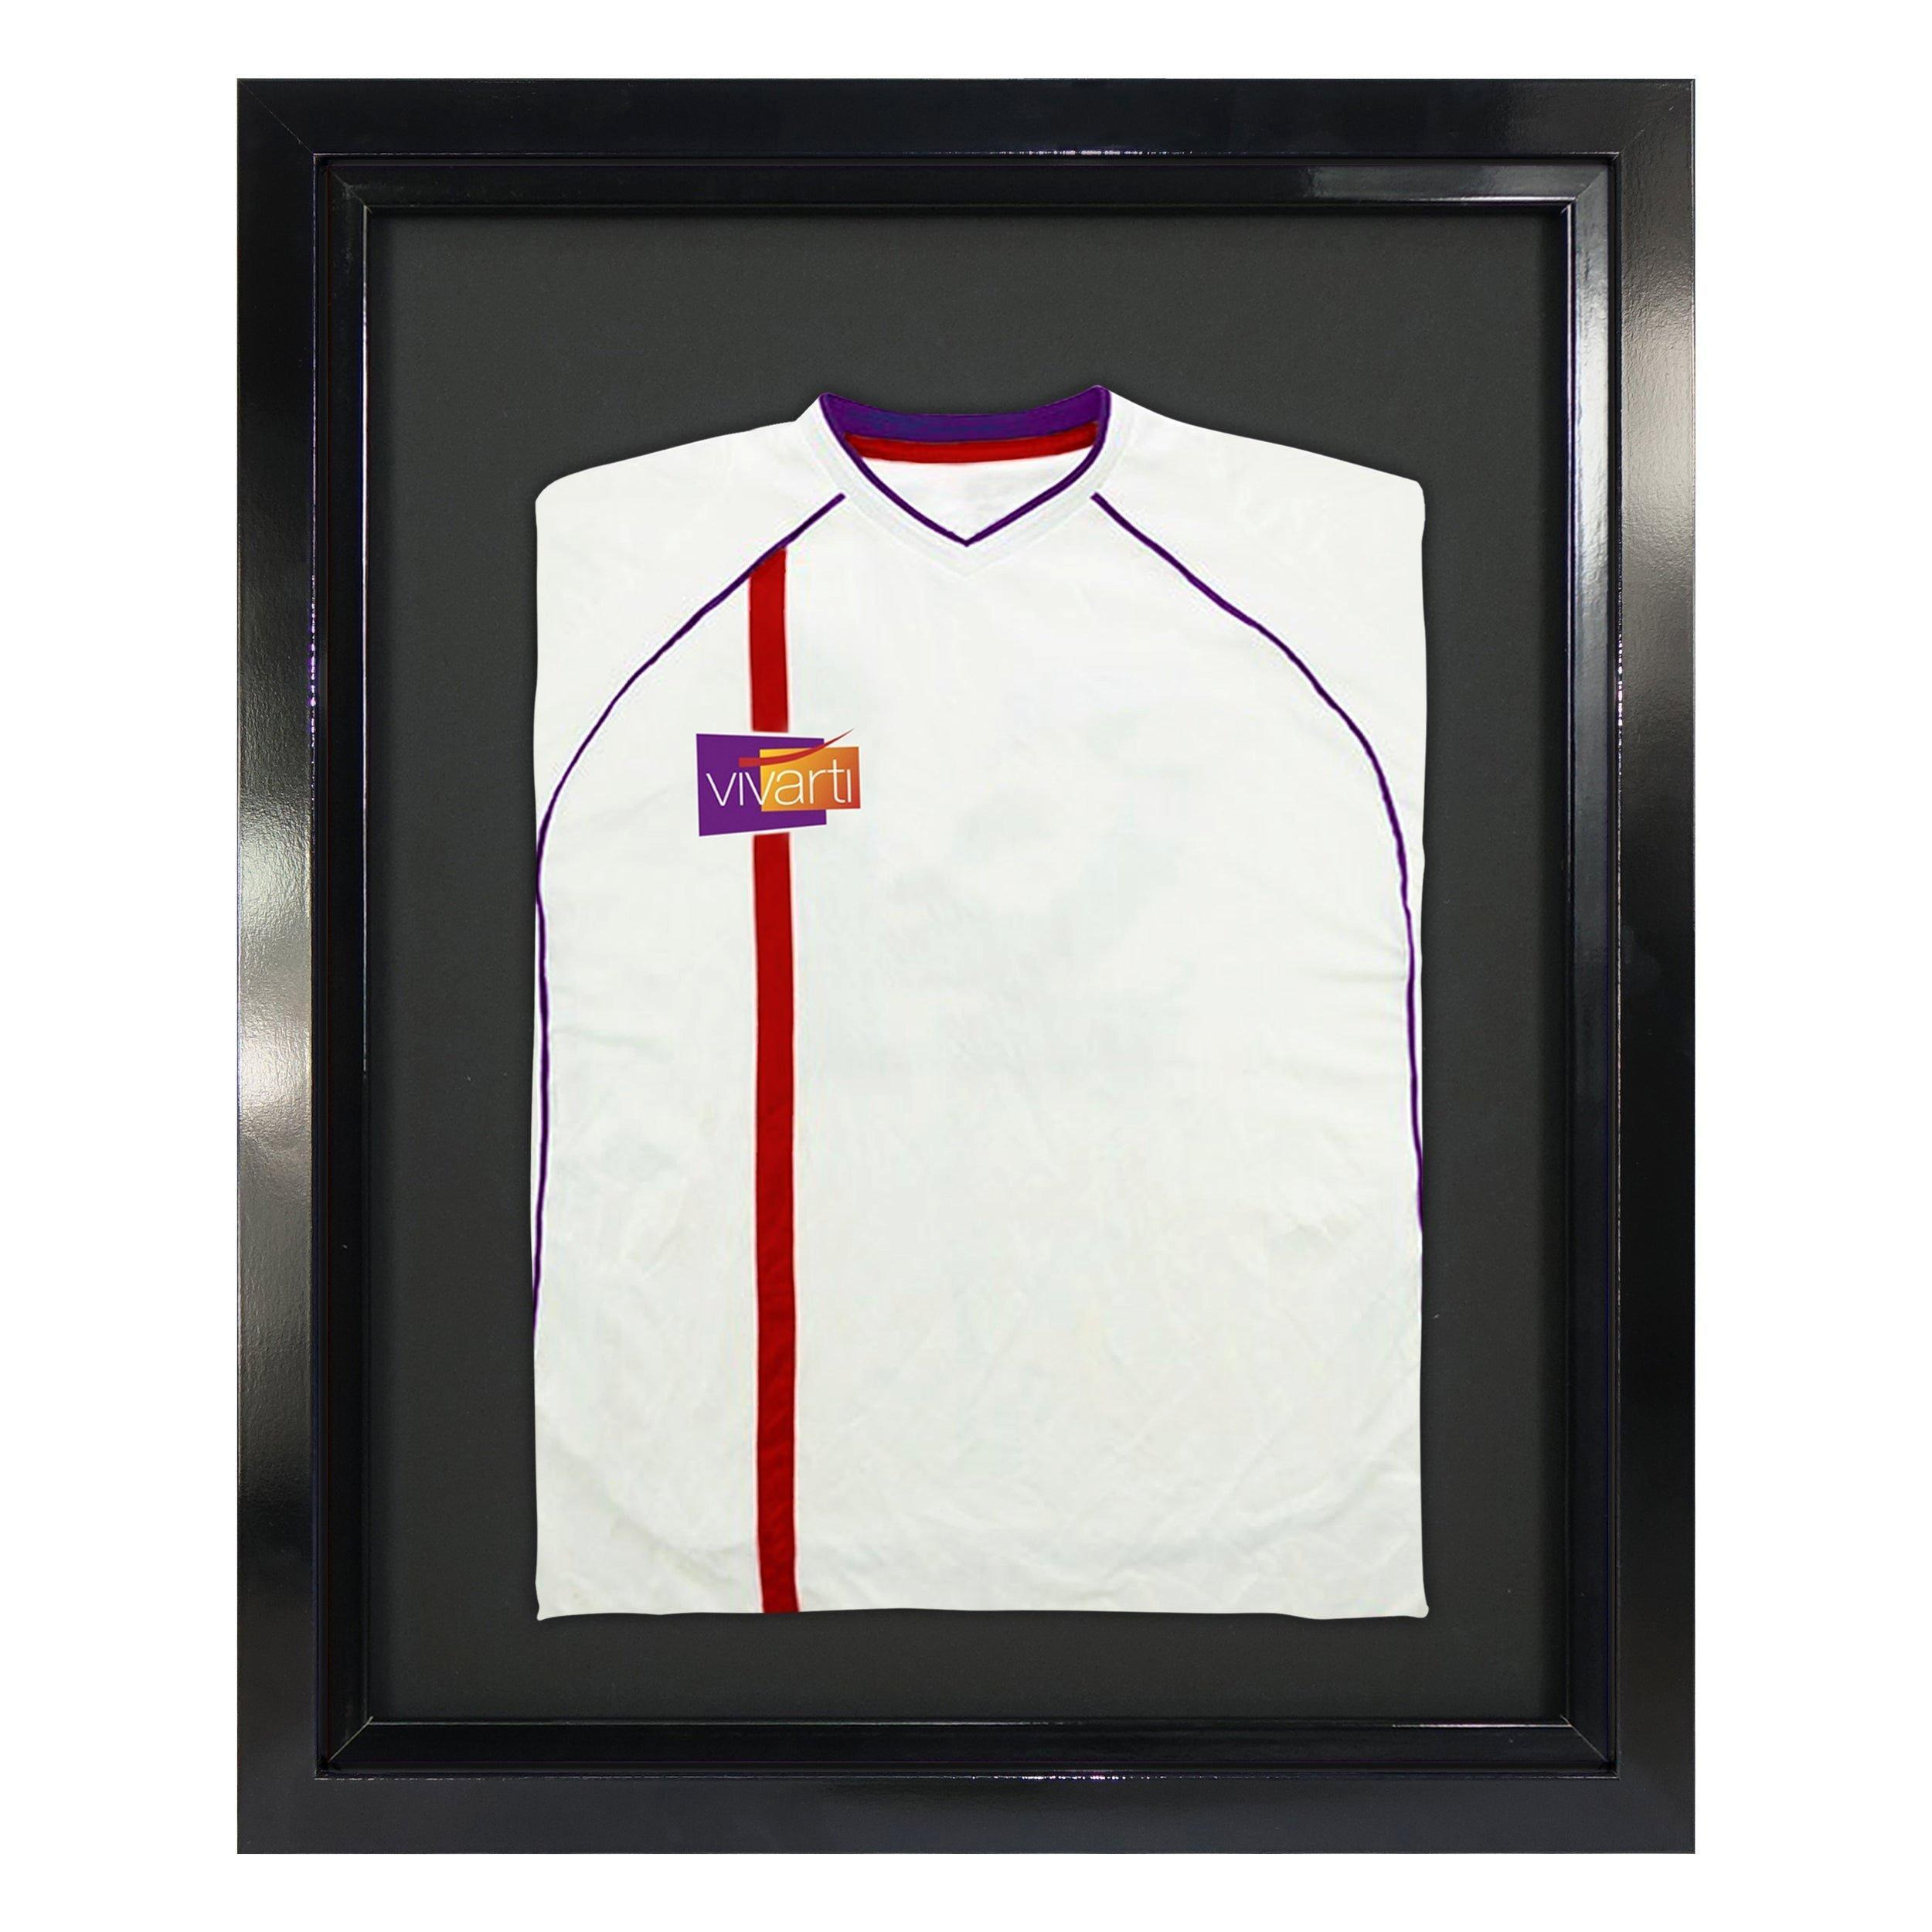 Standard Mounted Sports Shirt Display Frame with Gloss Black Frame and Black Inner Frame 40 x 50cm - image 1